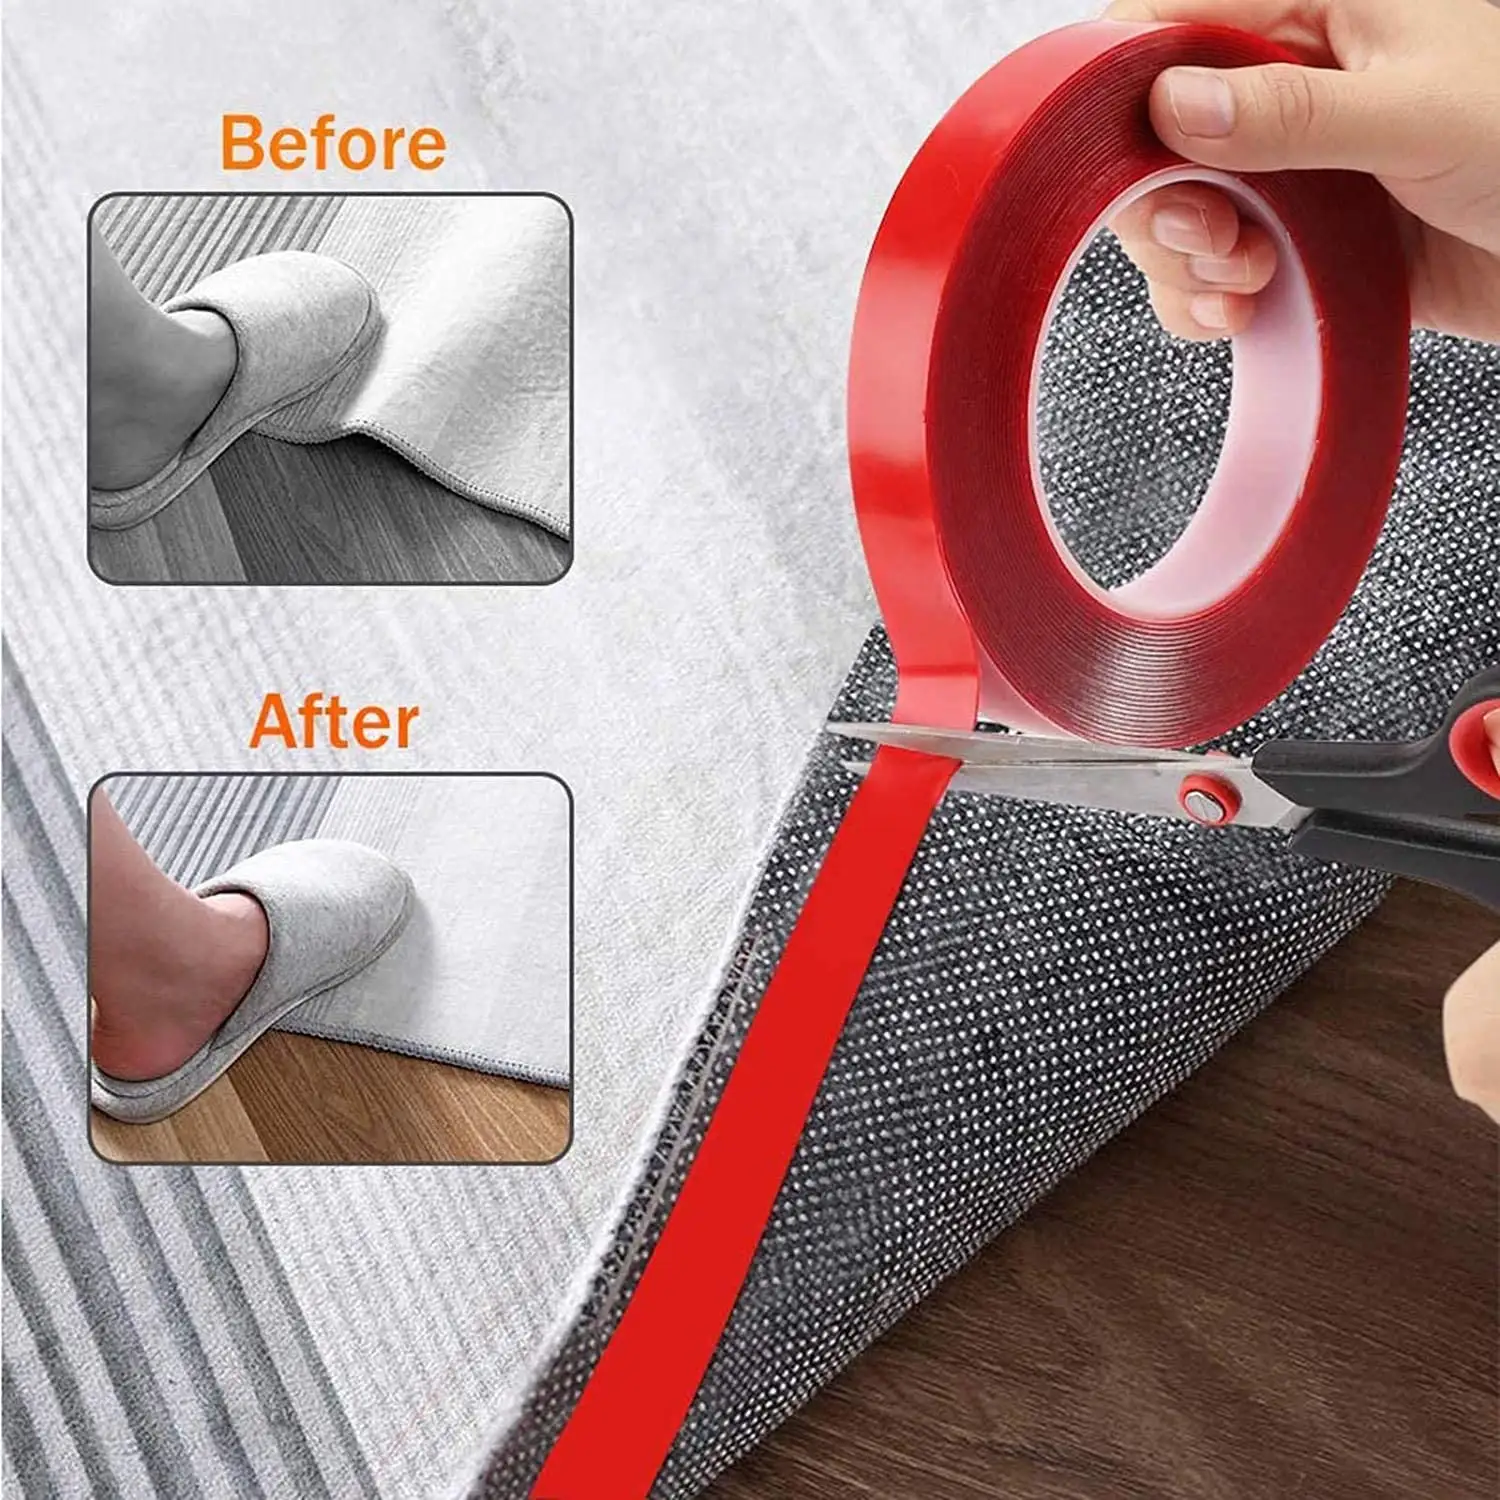 Traceless Tape Reusable Strong Bonding Clear Waterproof Removable Nano Trace Washable Adhesive Tape Thin Nano Tape